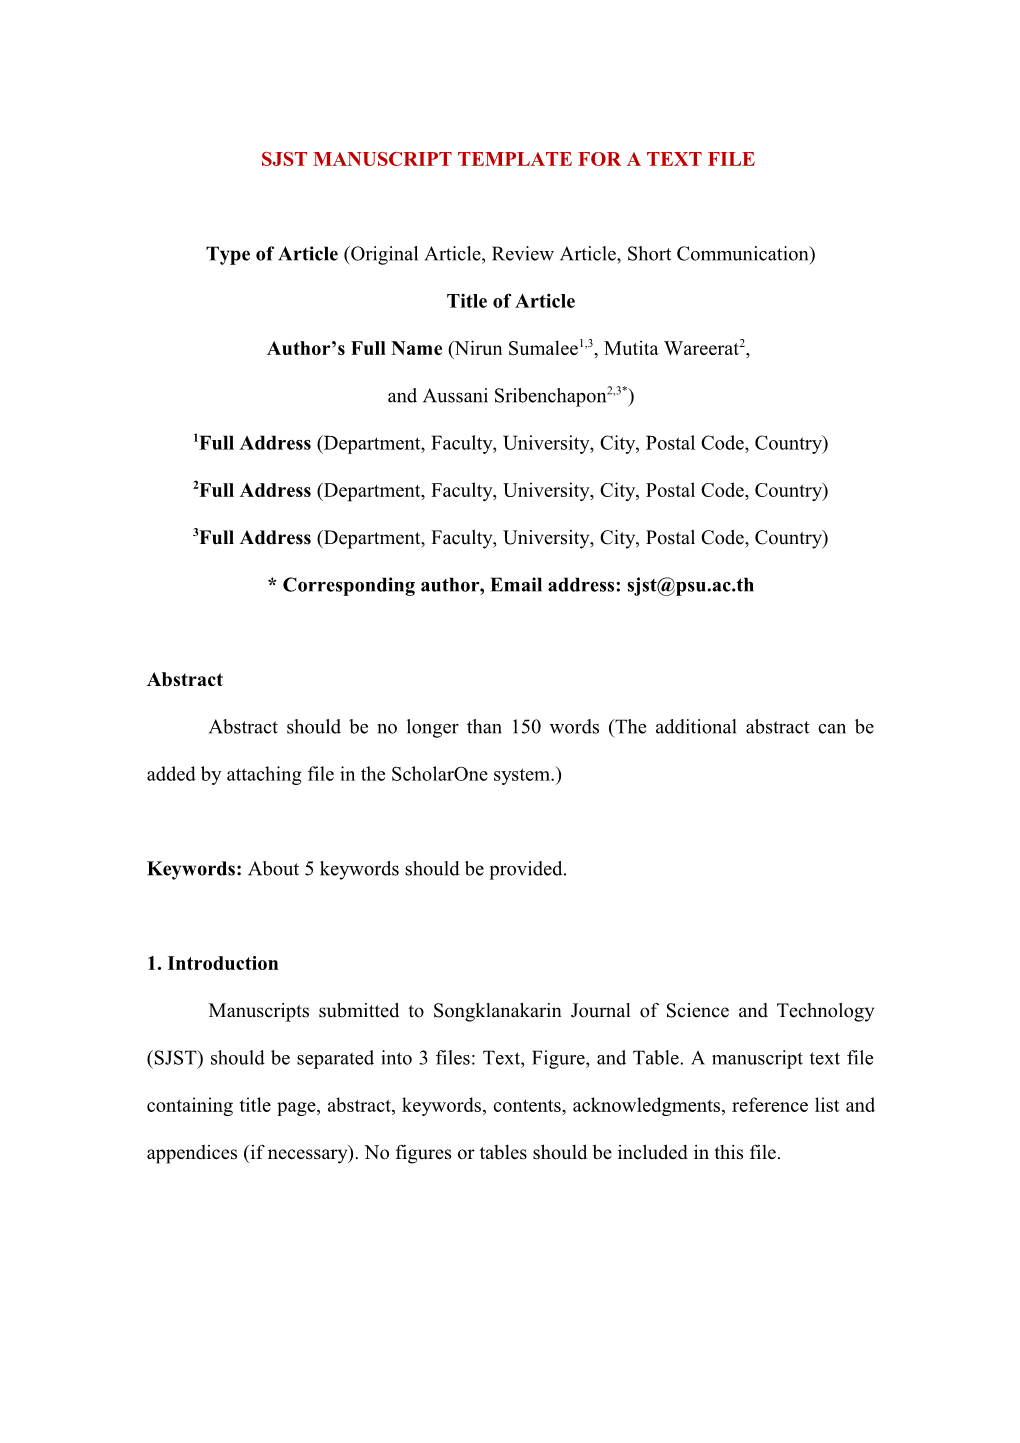 Sjst Manuscript Template for a Text File